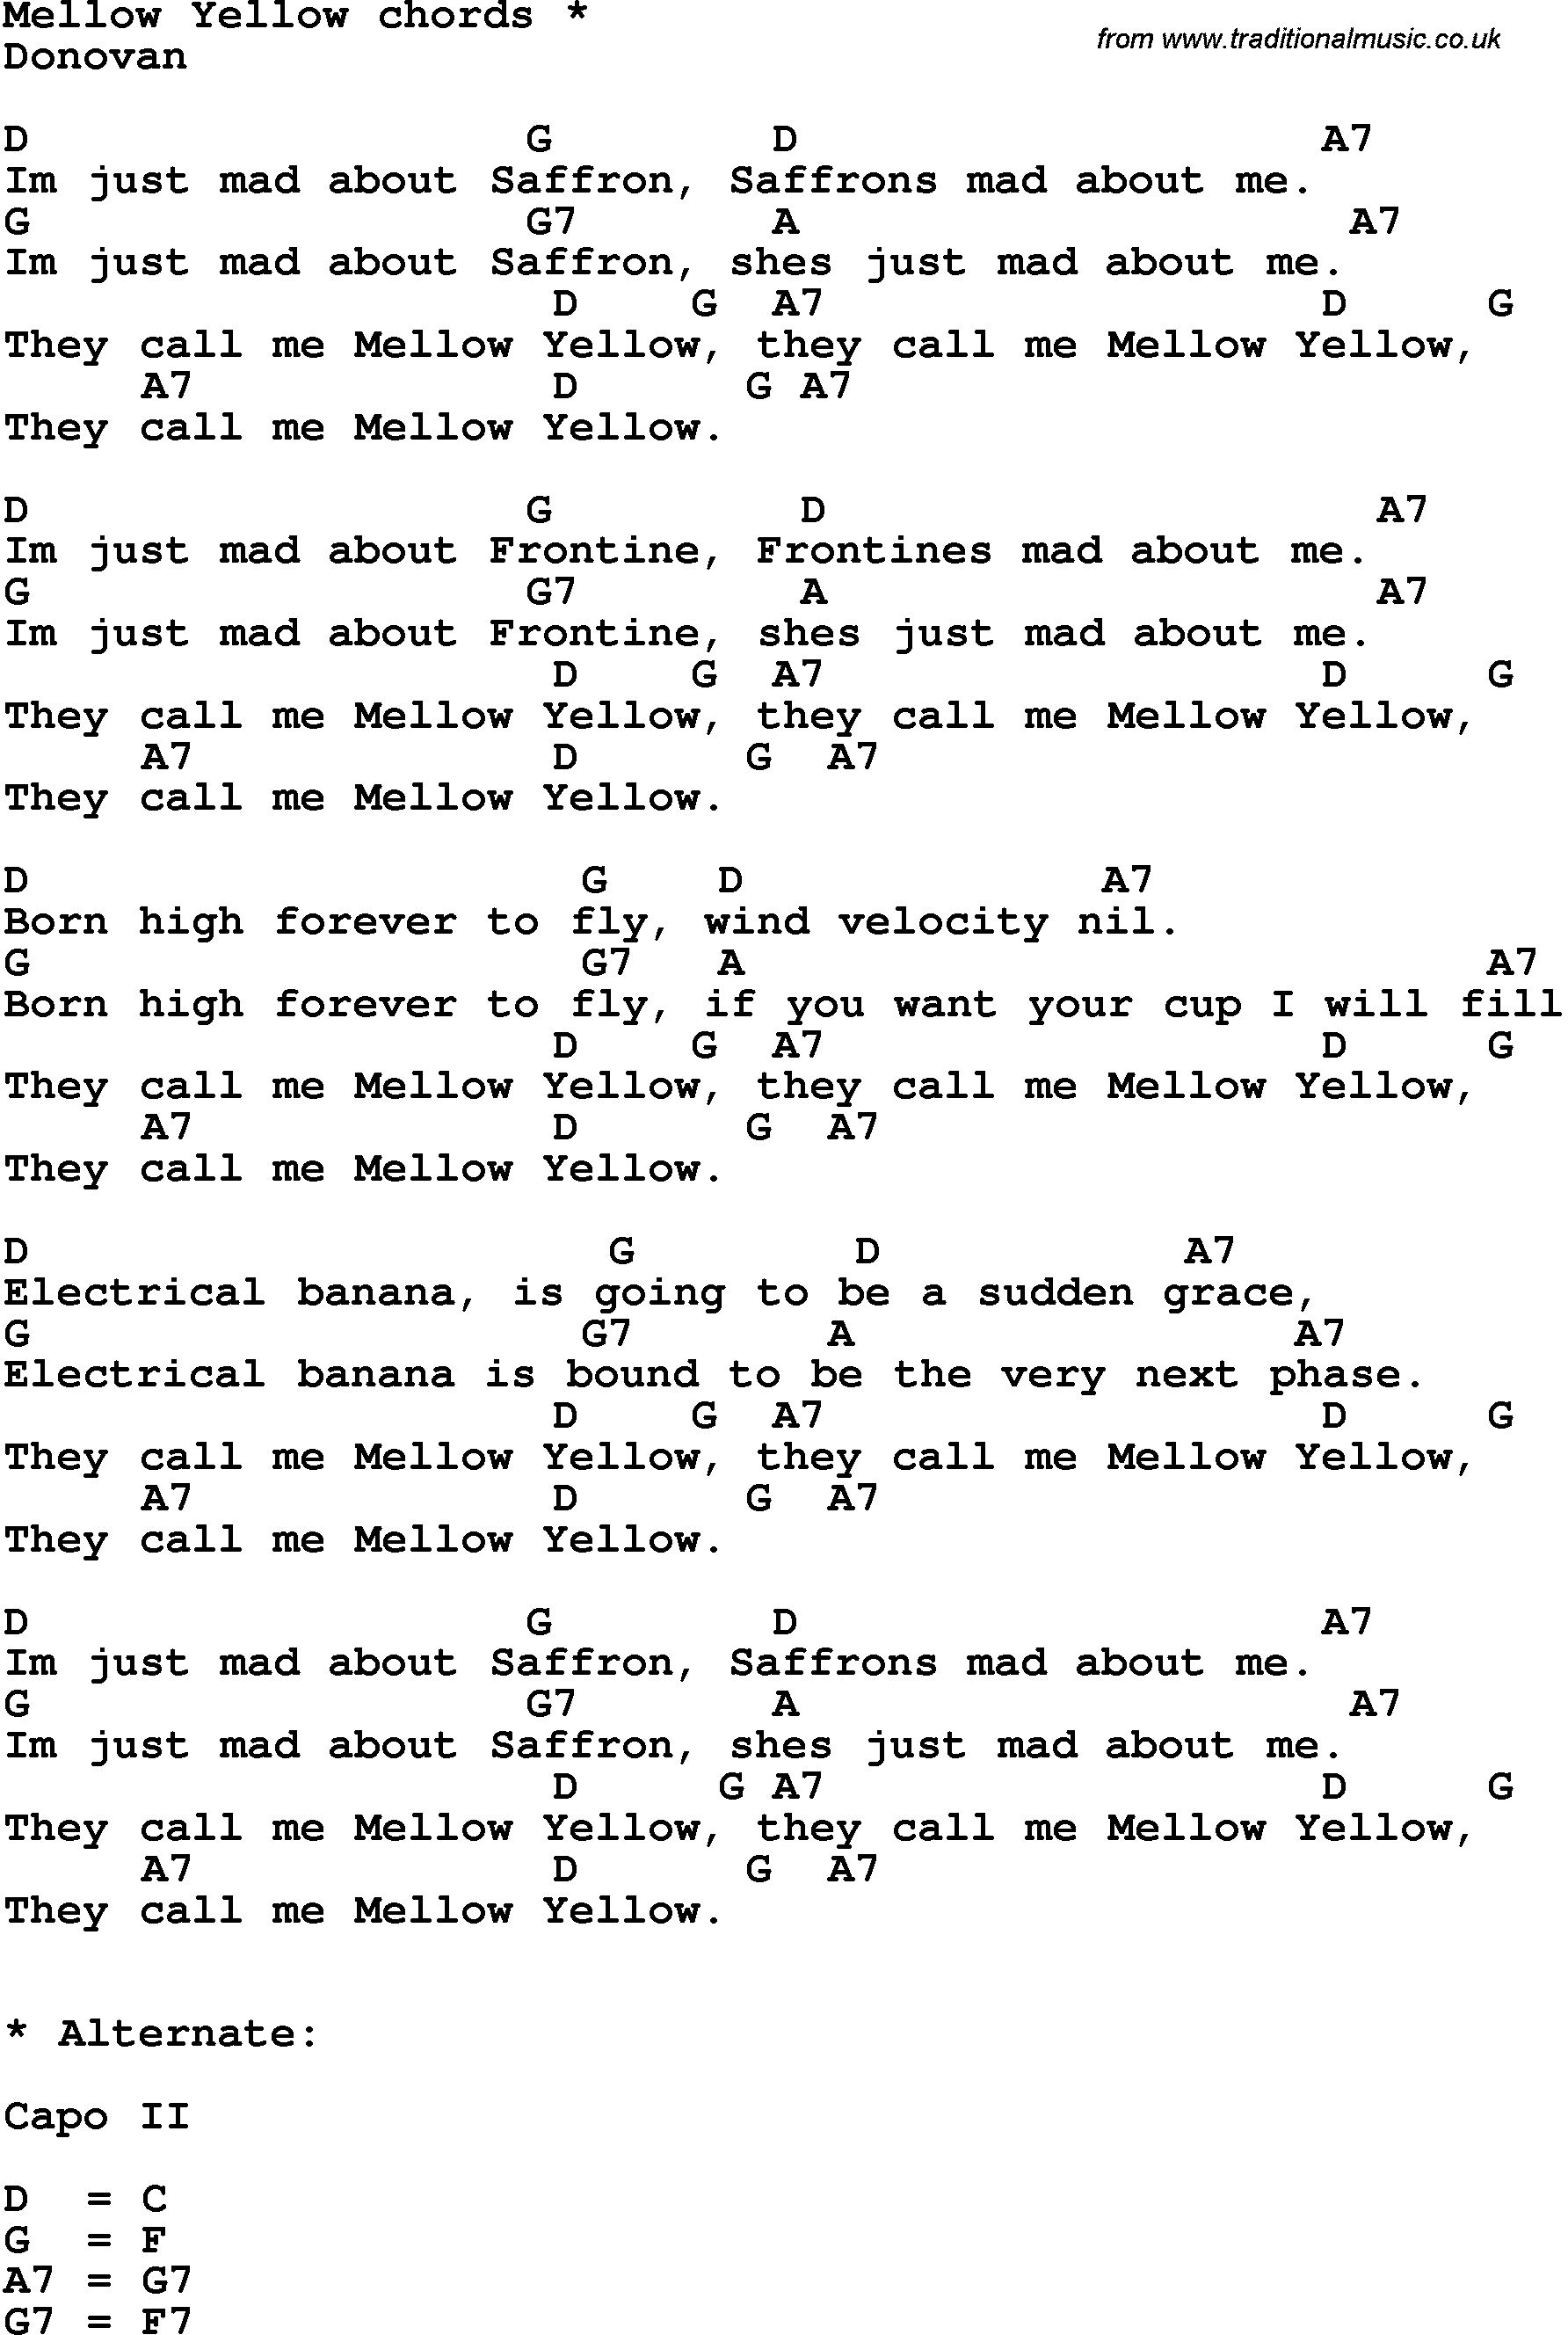 Song Lyrics with guitar chords for Mellow Yellow